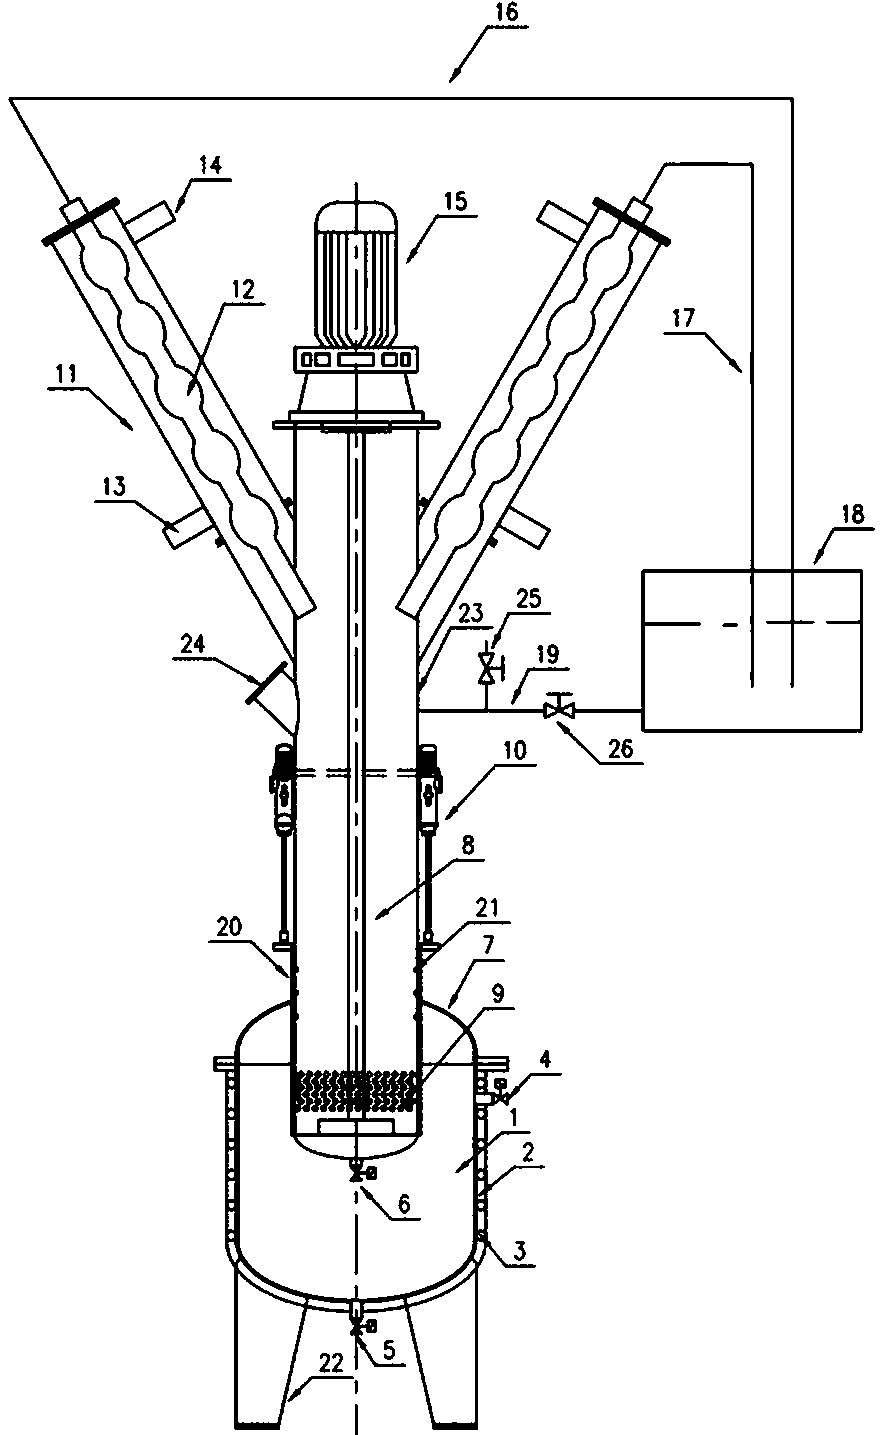 Telescoping extraction device for efficiently recovering valuable components of manganese slag